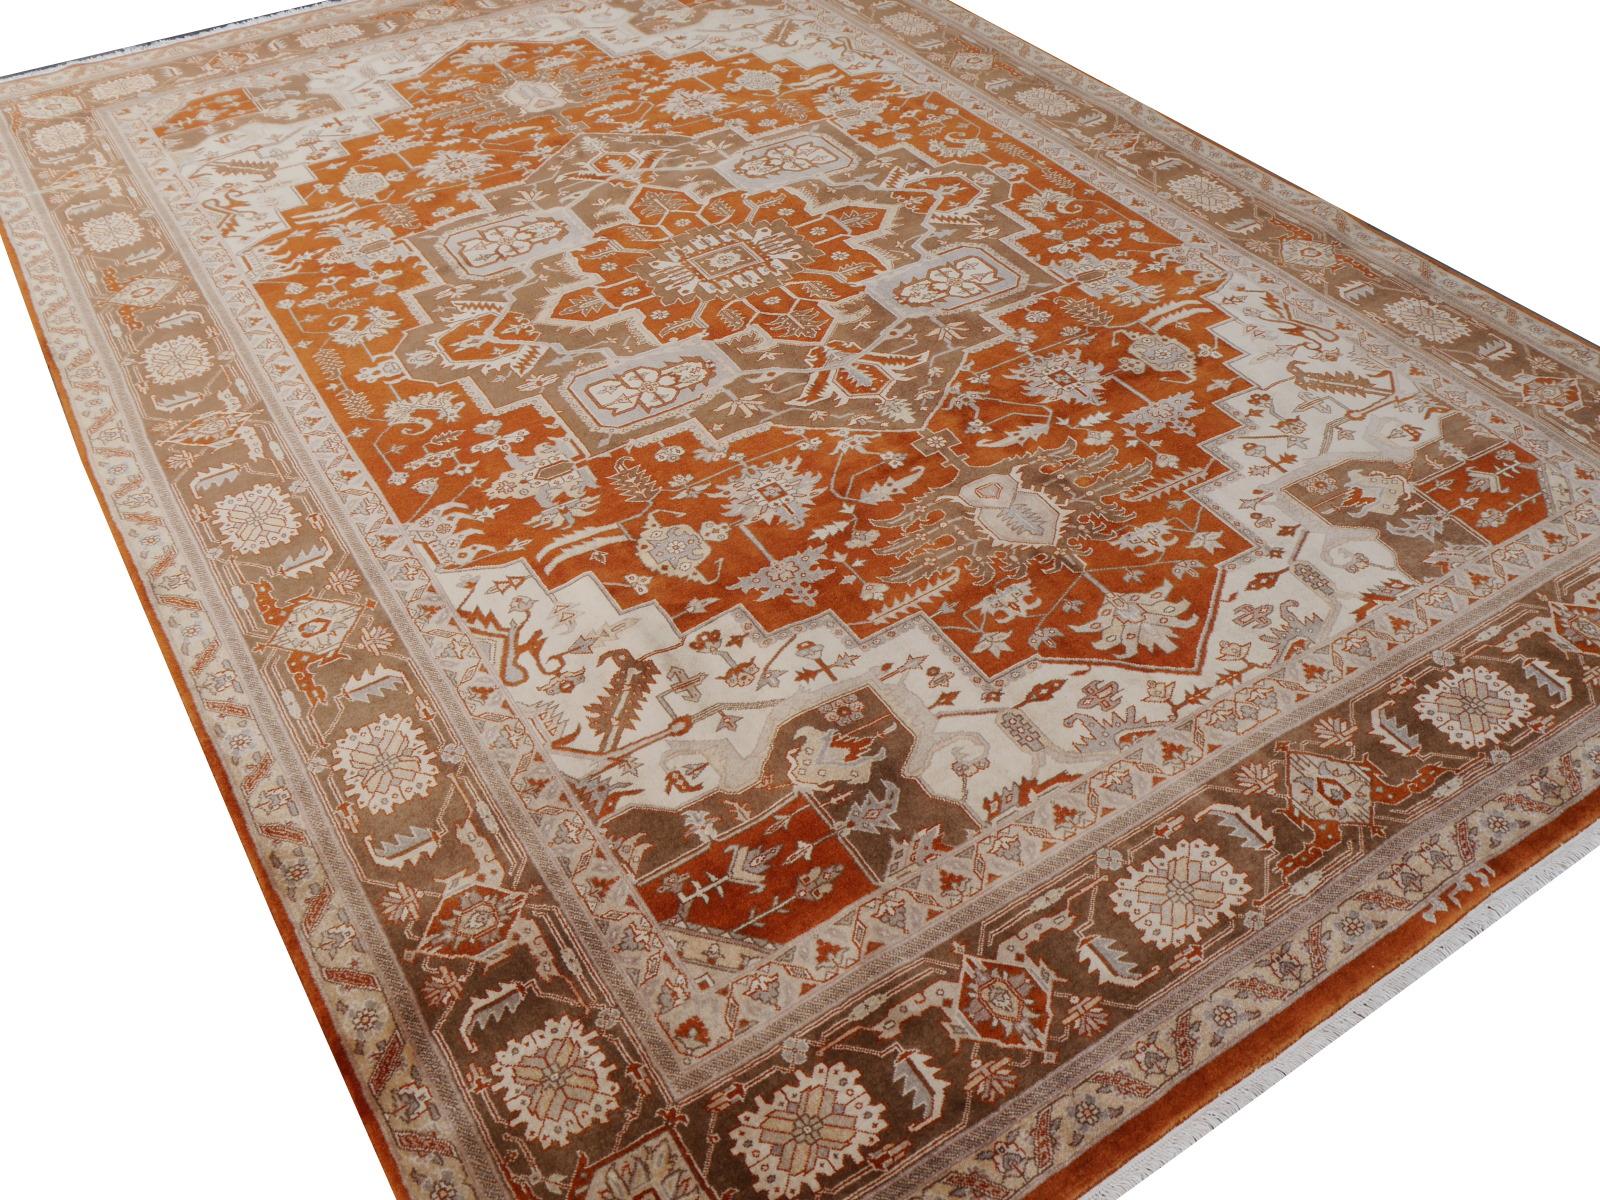 21st Century Modern Luxury Indian Rug with Herz Design Centemporary Colors 5